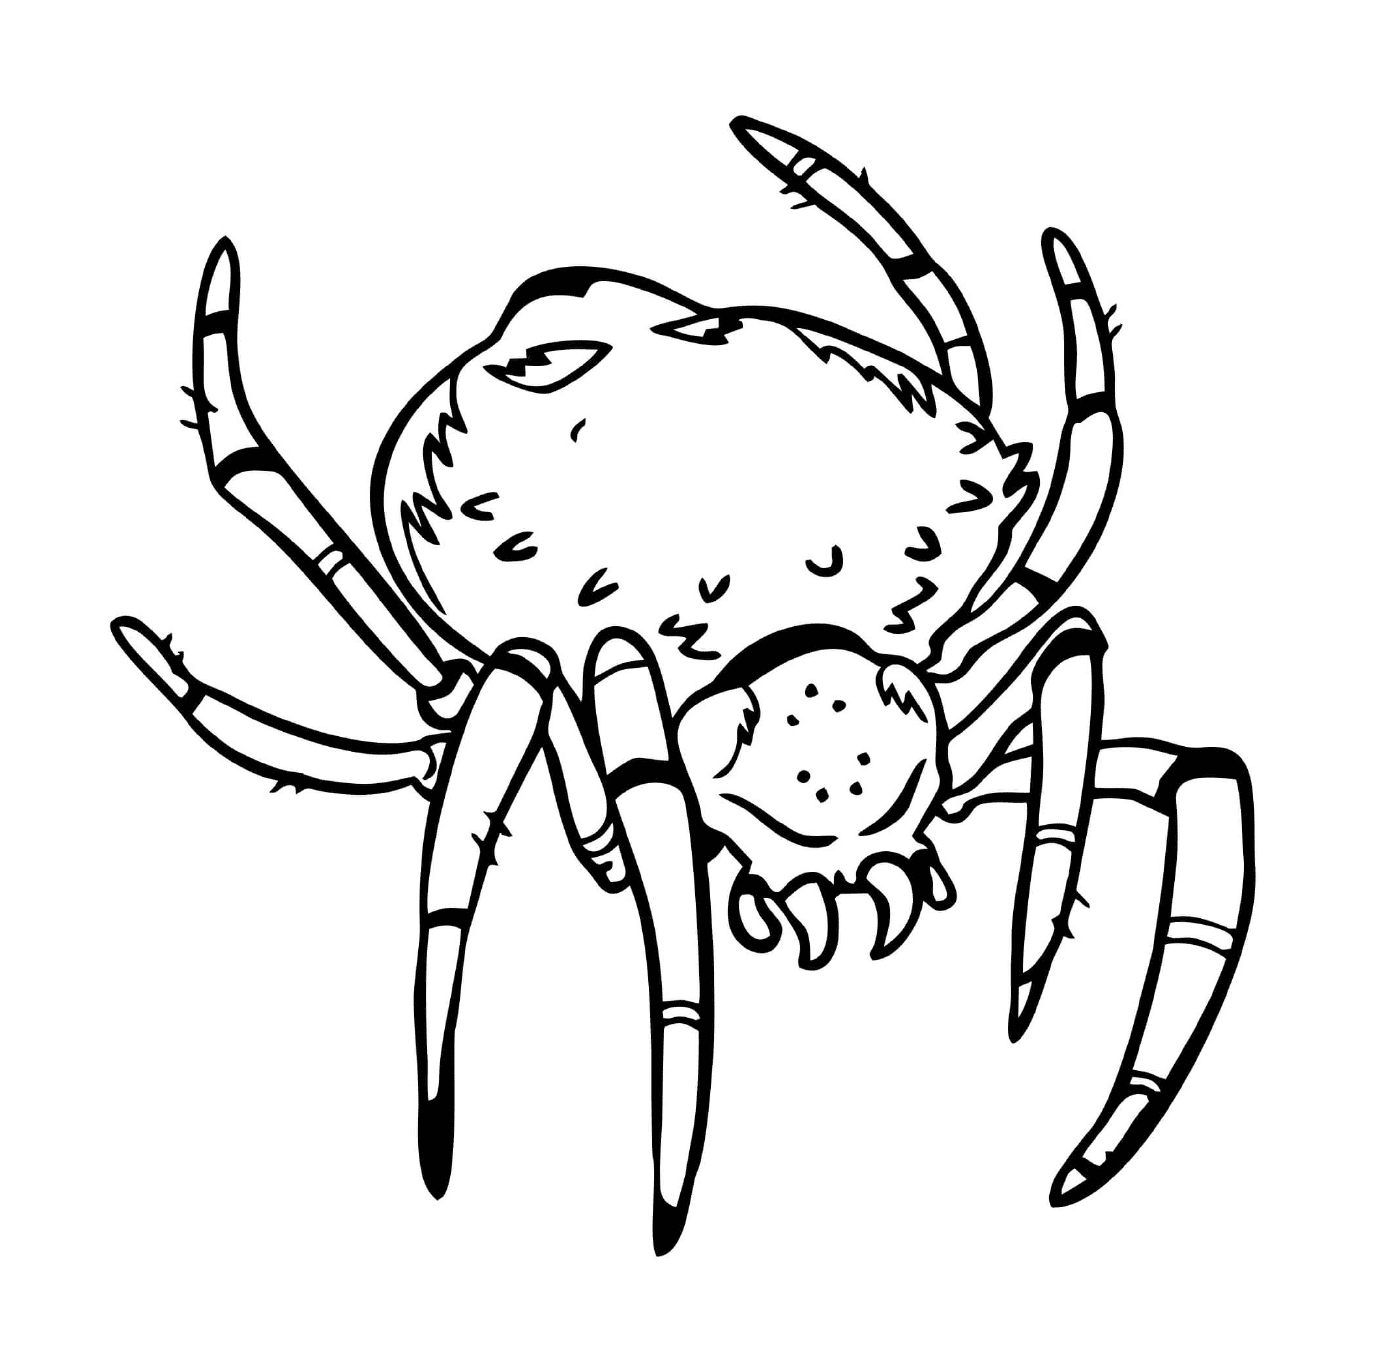  A scary spider with a big body 